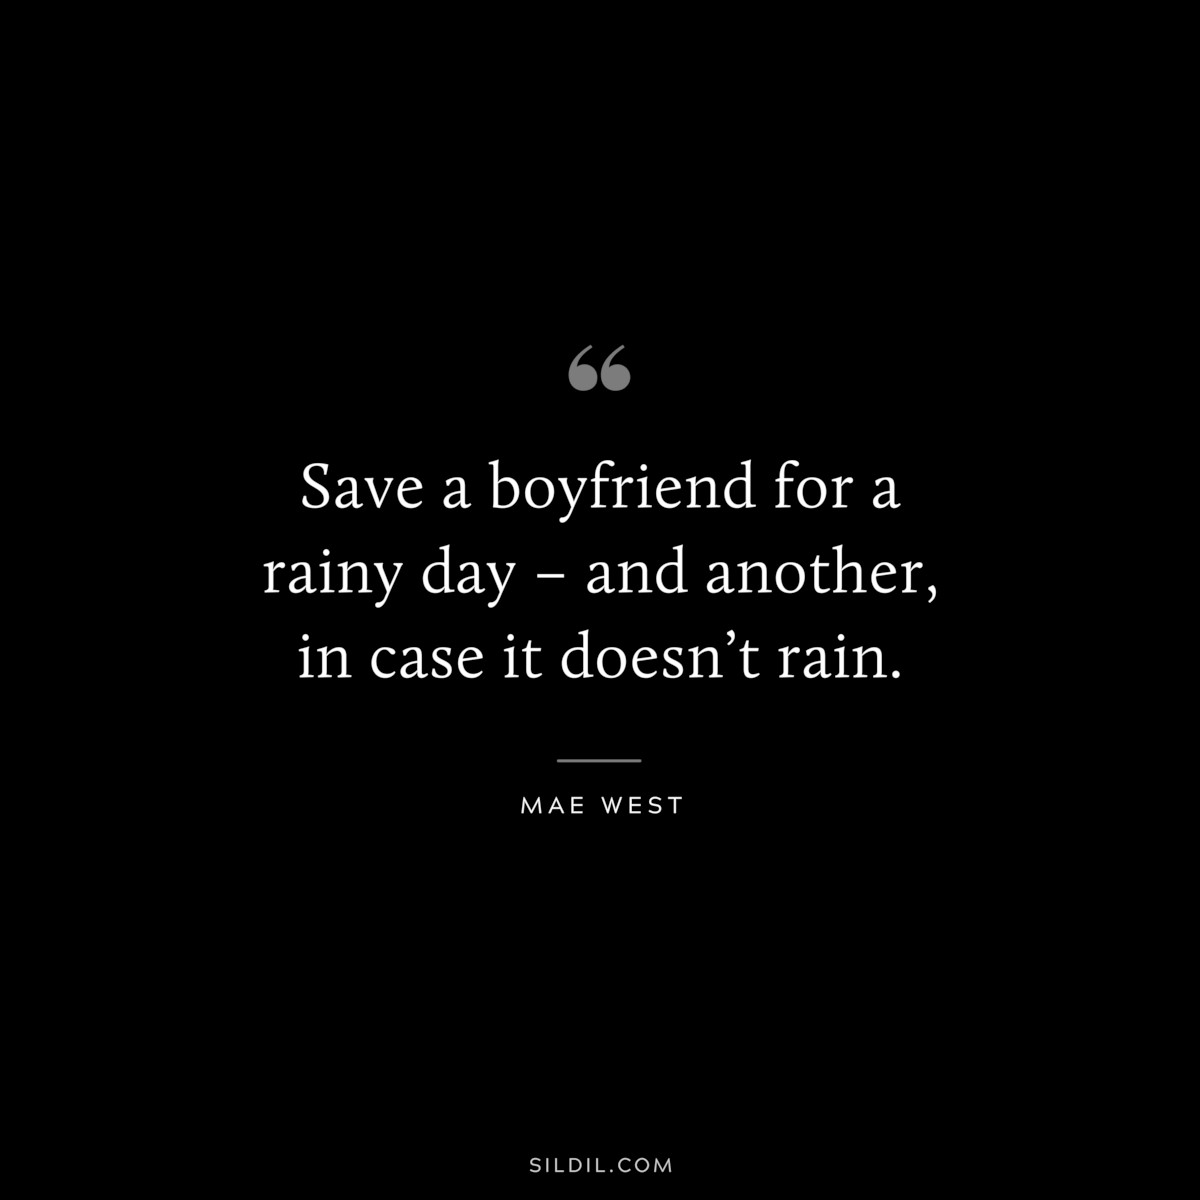 Save a boyfriend for a rainy day – and another, in case it doesn’t rain. ― Mae West